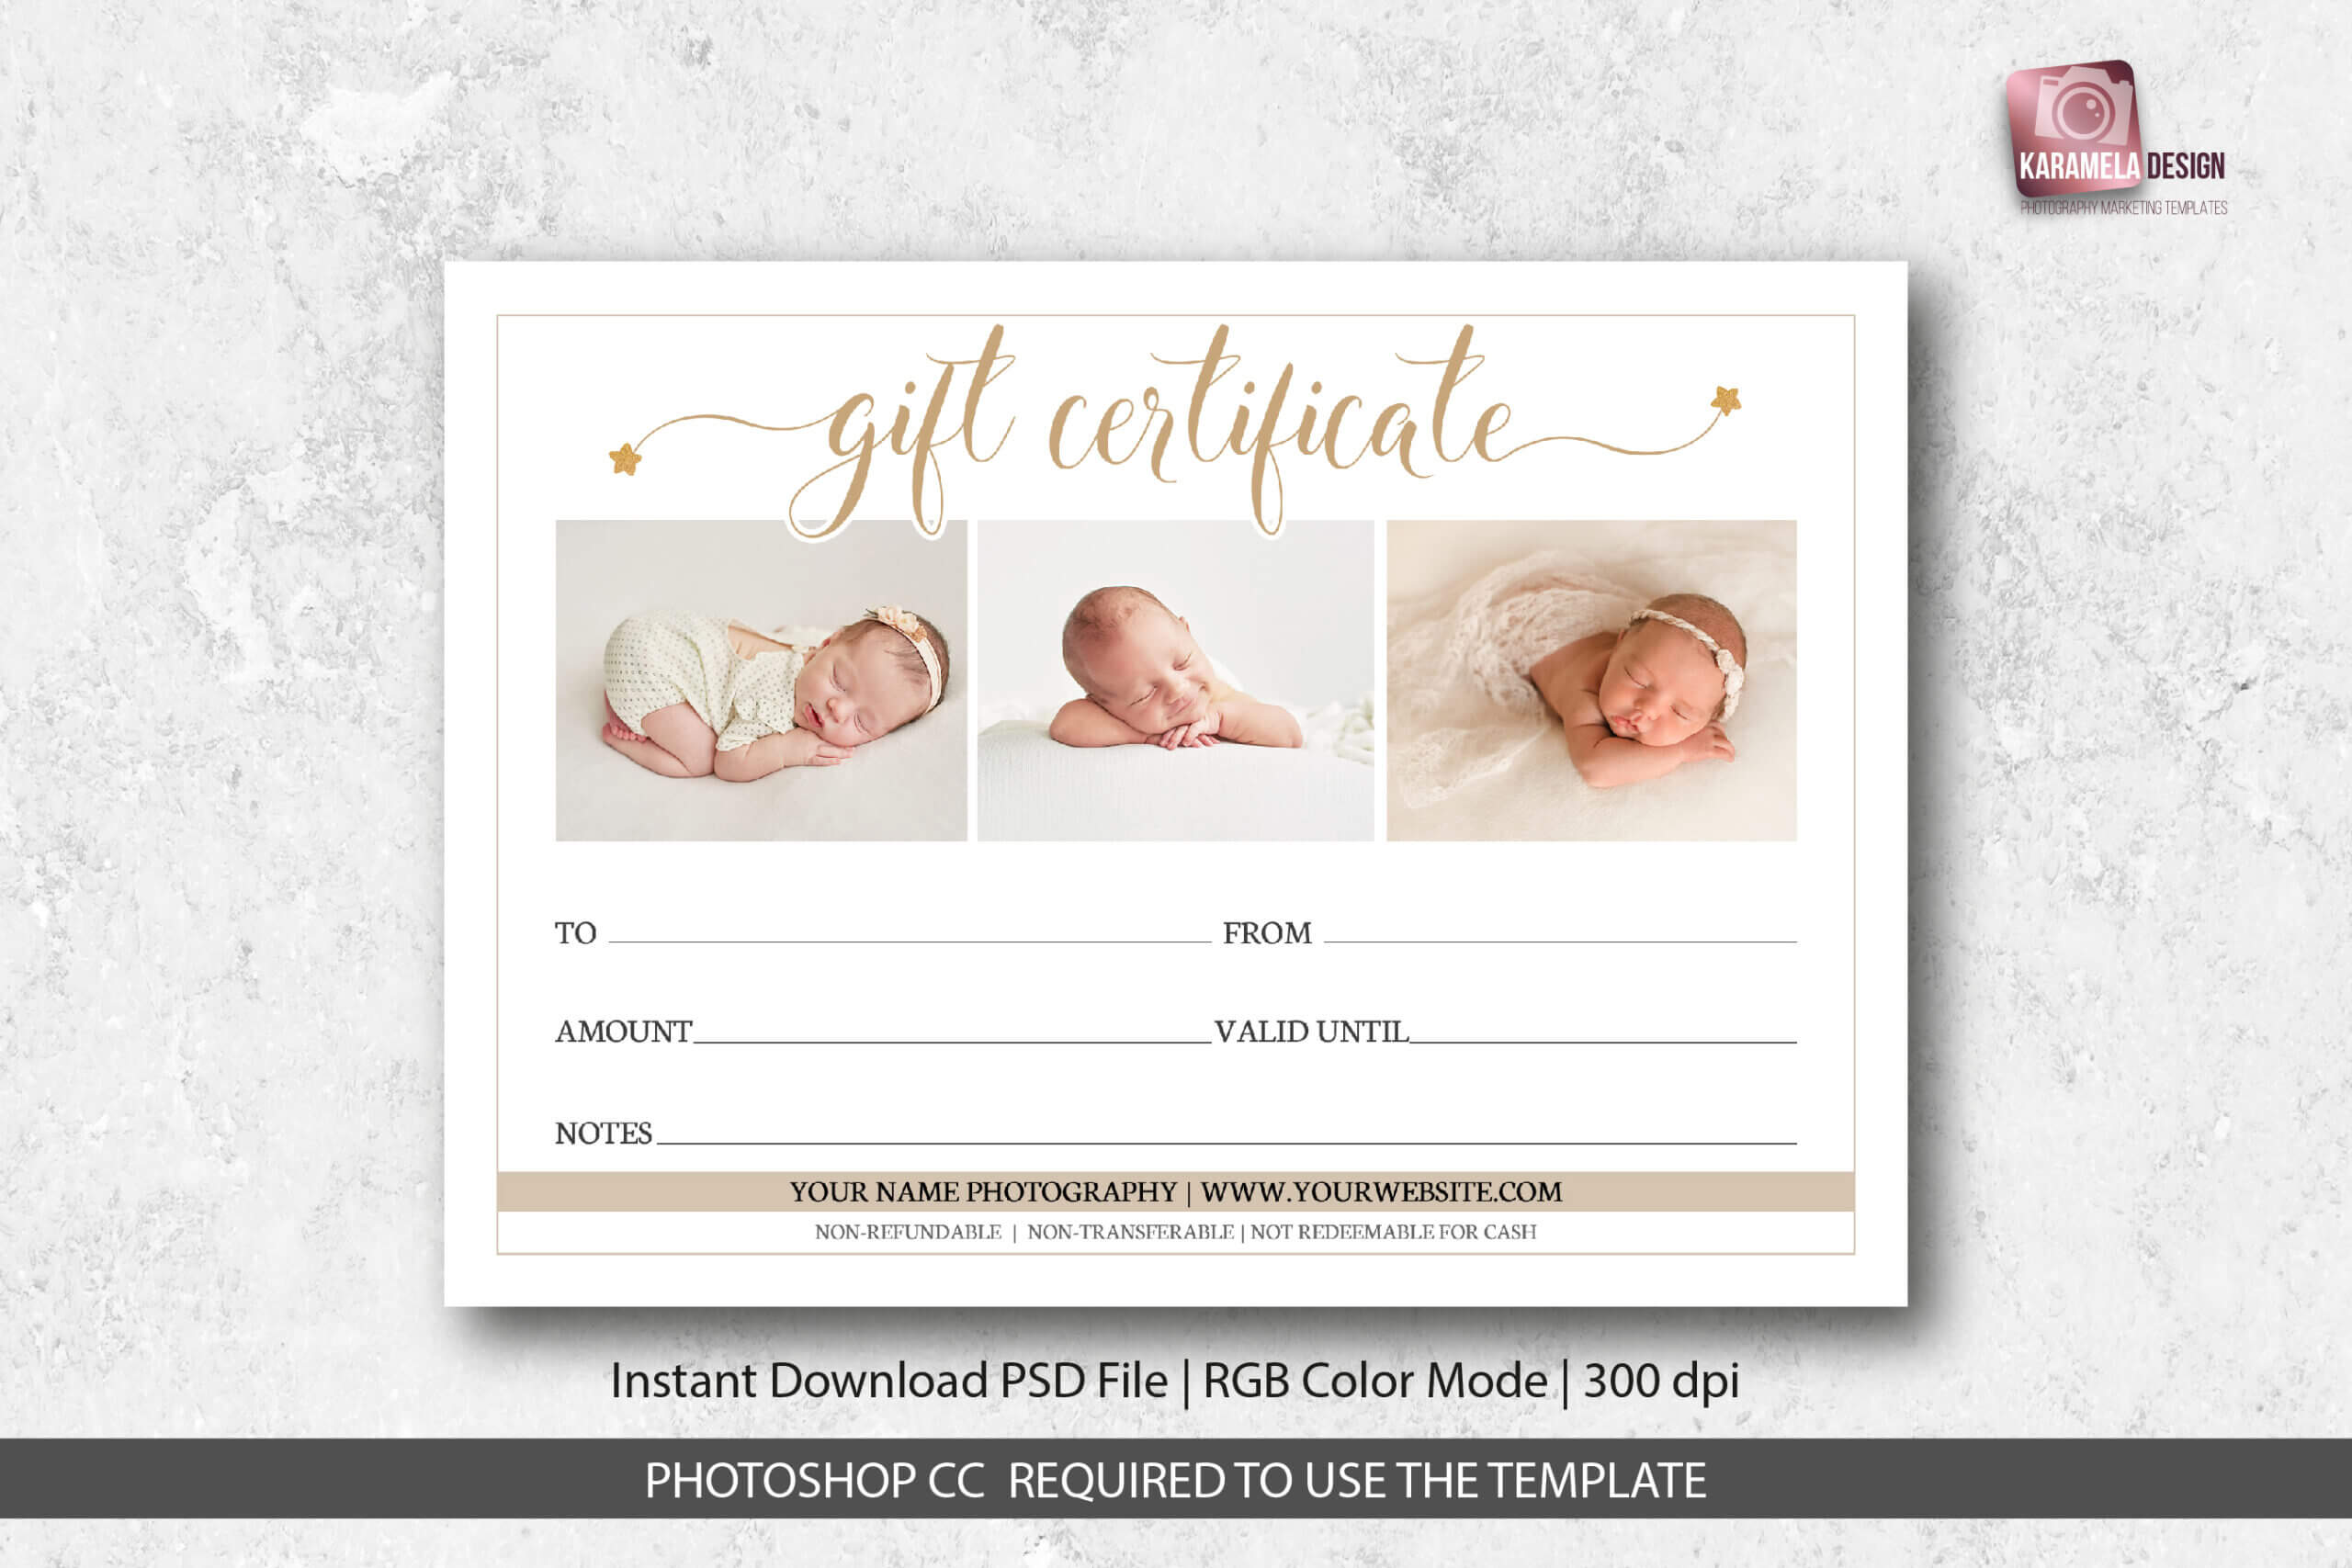 Photography Studio Gift Certificate Template For Photoshoot Gift Certificate Template